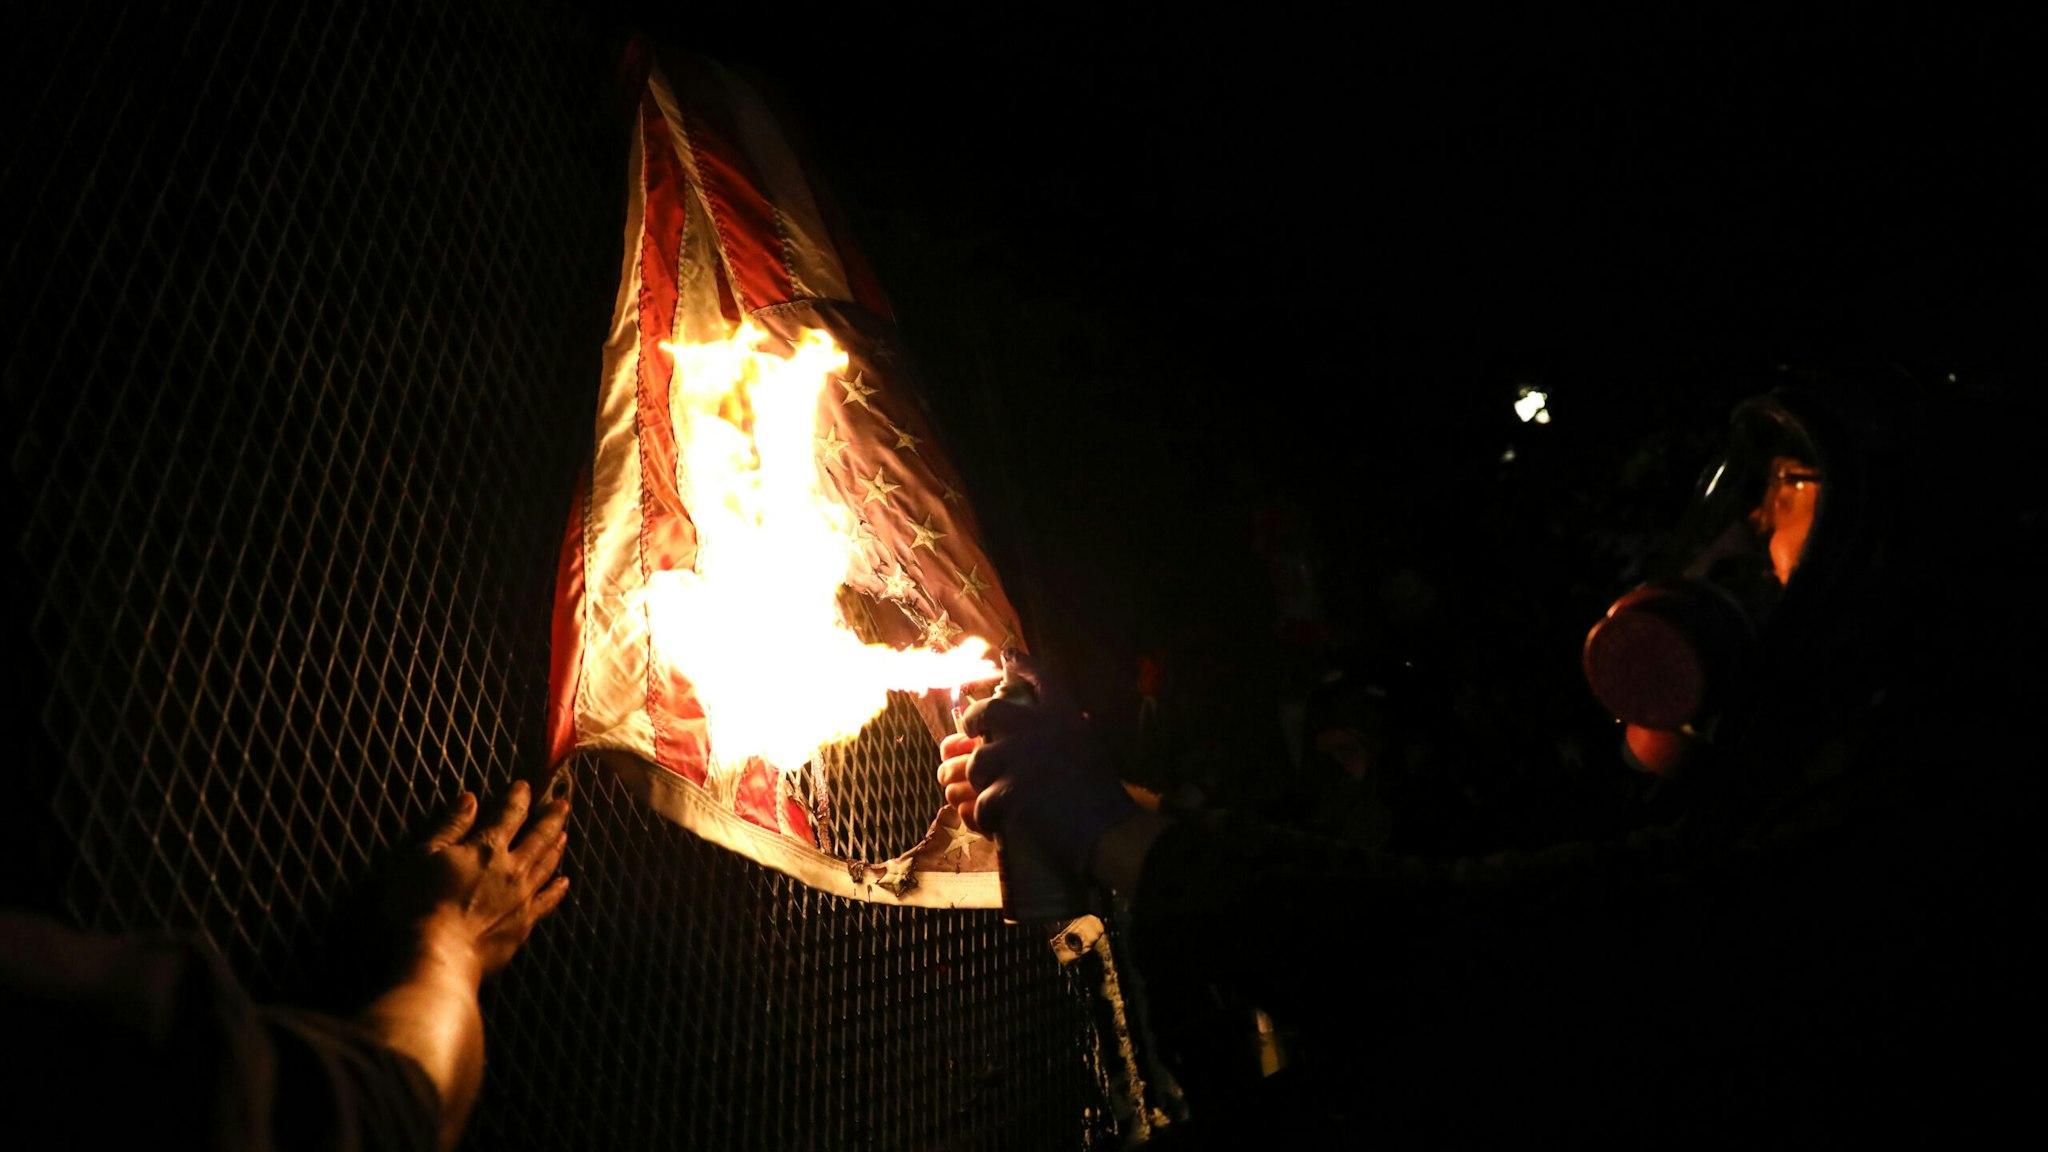 PORTLAND, OREGON - JULY 25: An American Flag is burned as protesters gather in front of the Mark O. Hatfield federal courthouse in downtown Portland as the city experiences another night of unrest on July 25, 2020 in Portland, Oregon. For over 55 straight nights, protesters in downtown Portland have faced off in often violent clashes with the Portland Police Bureau and, more recently, federal officers. The demonstrations began to honor the life of George Floyd and other black Americans killed by law enforcement and have intensified as the Trump administration called in the federal officers.